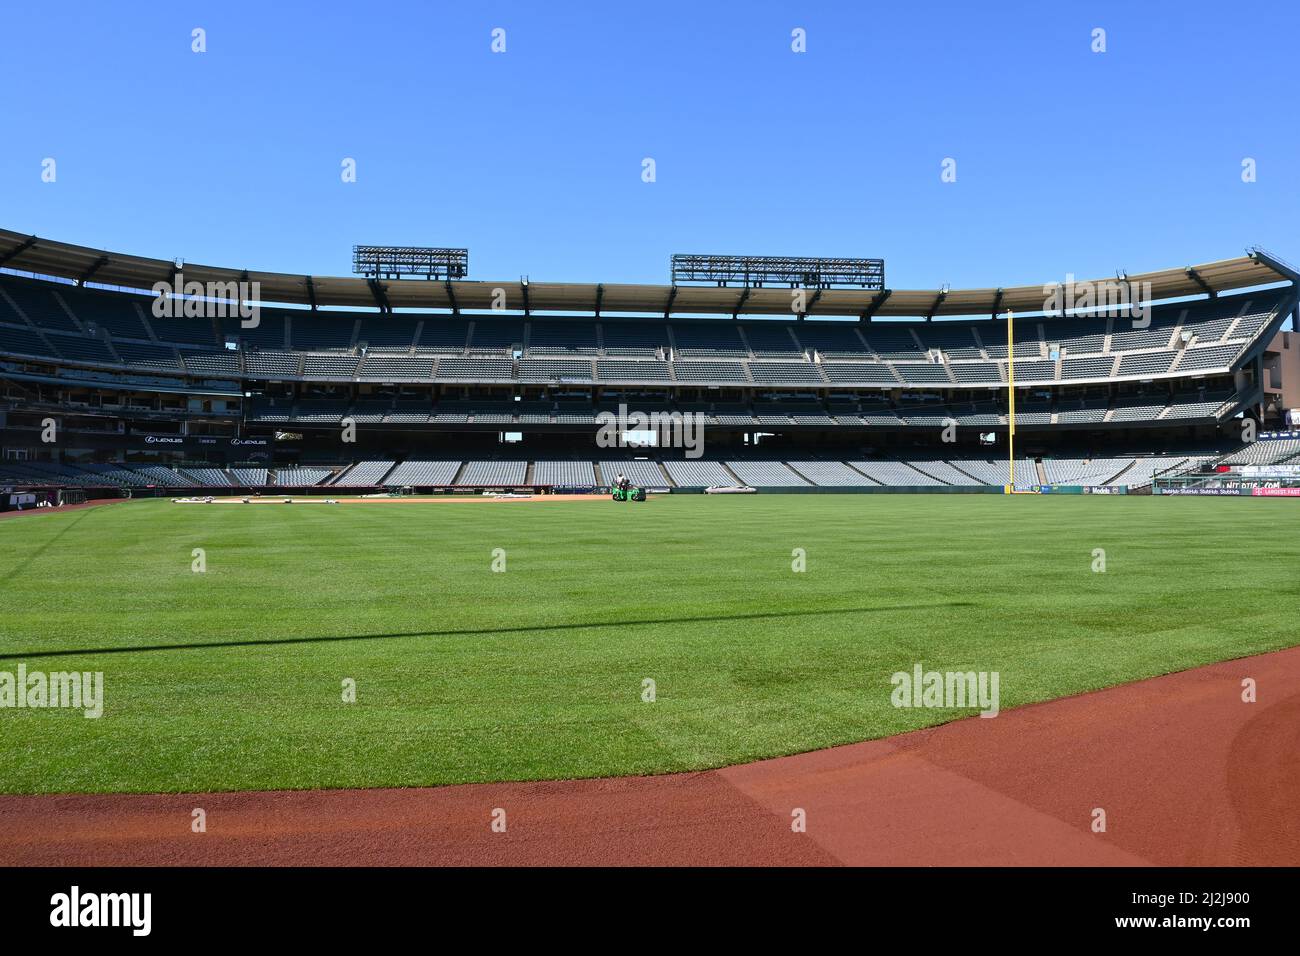 ANAHEIM, CALIFORNIA -10 MAR 2022: Groundskeeper rolling new sod at Angel Stadium in preparation for Opening Day and the 2022 season. Stock Photo